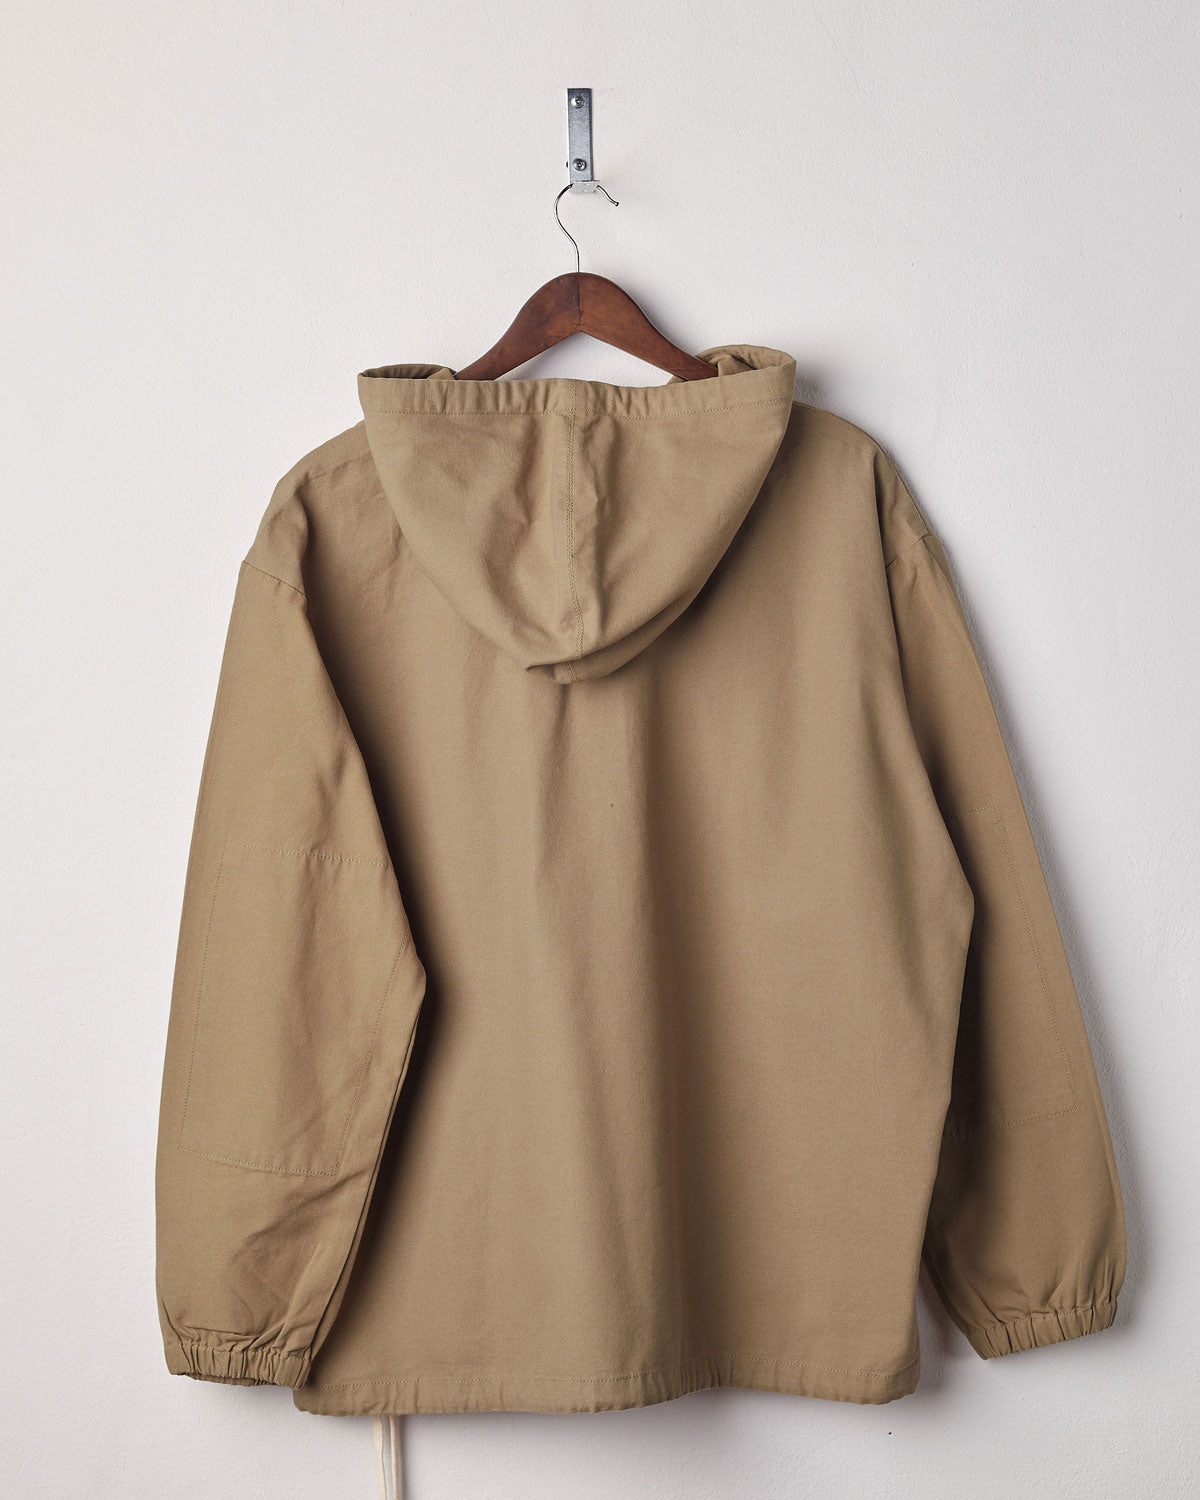 Back view of khaki coloured buttoned smock from Uskees with view of hood. Presented on hanger with white backdrop.